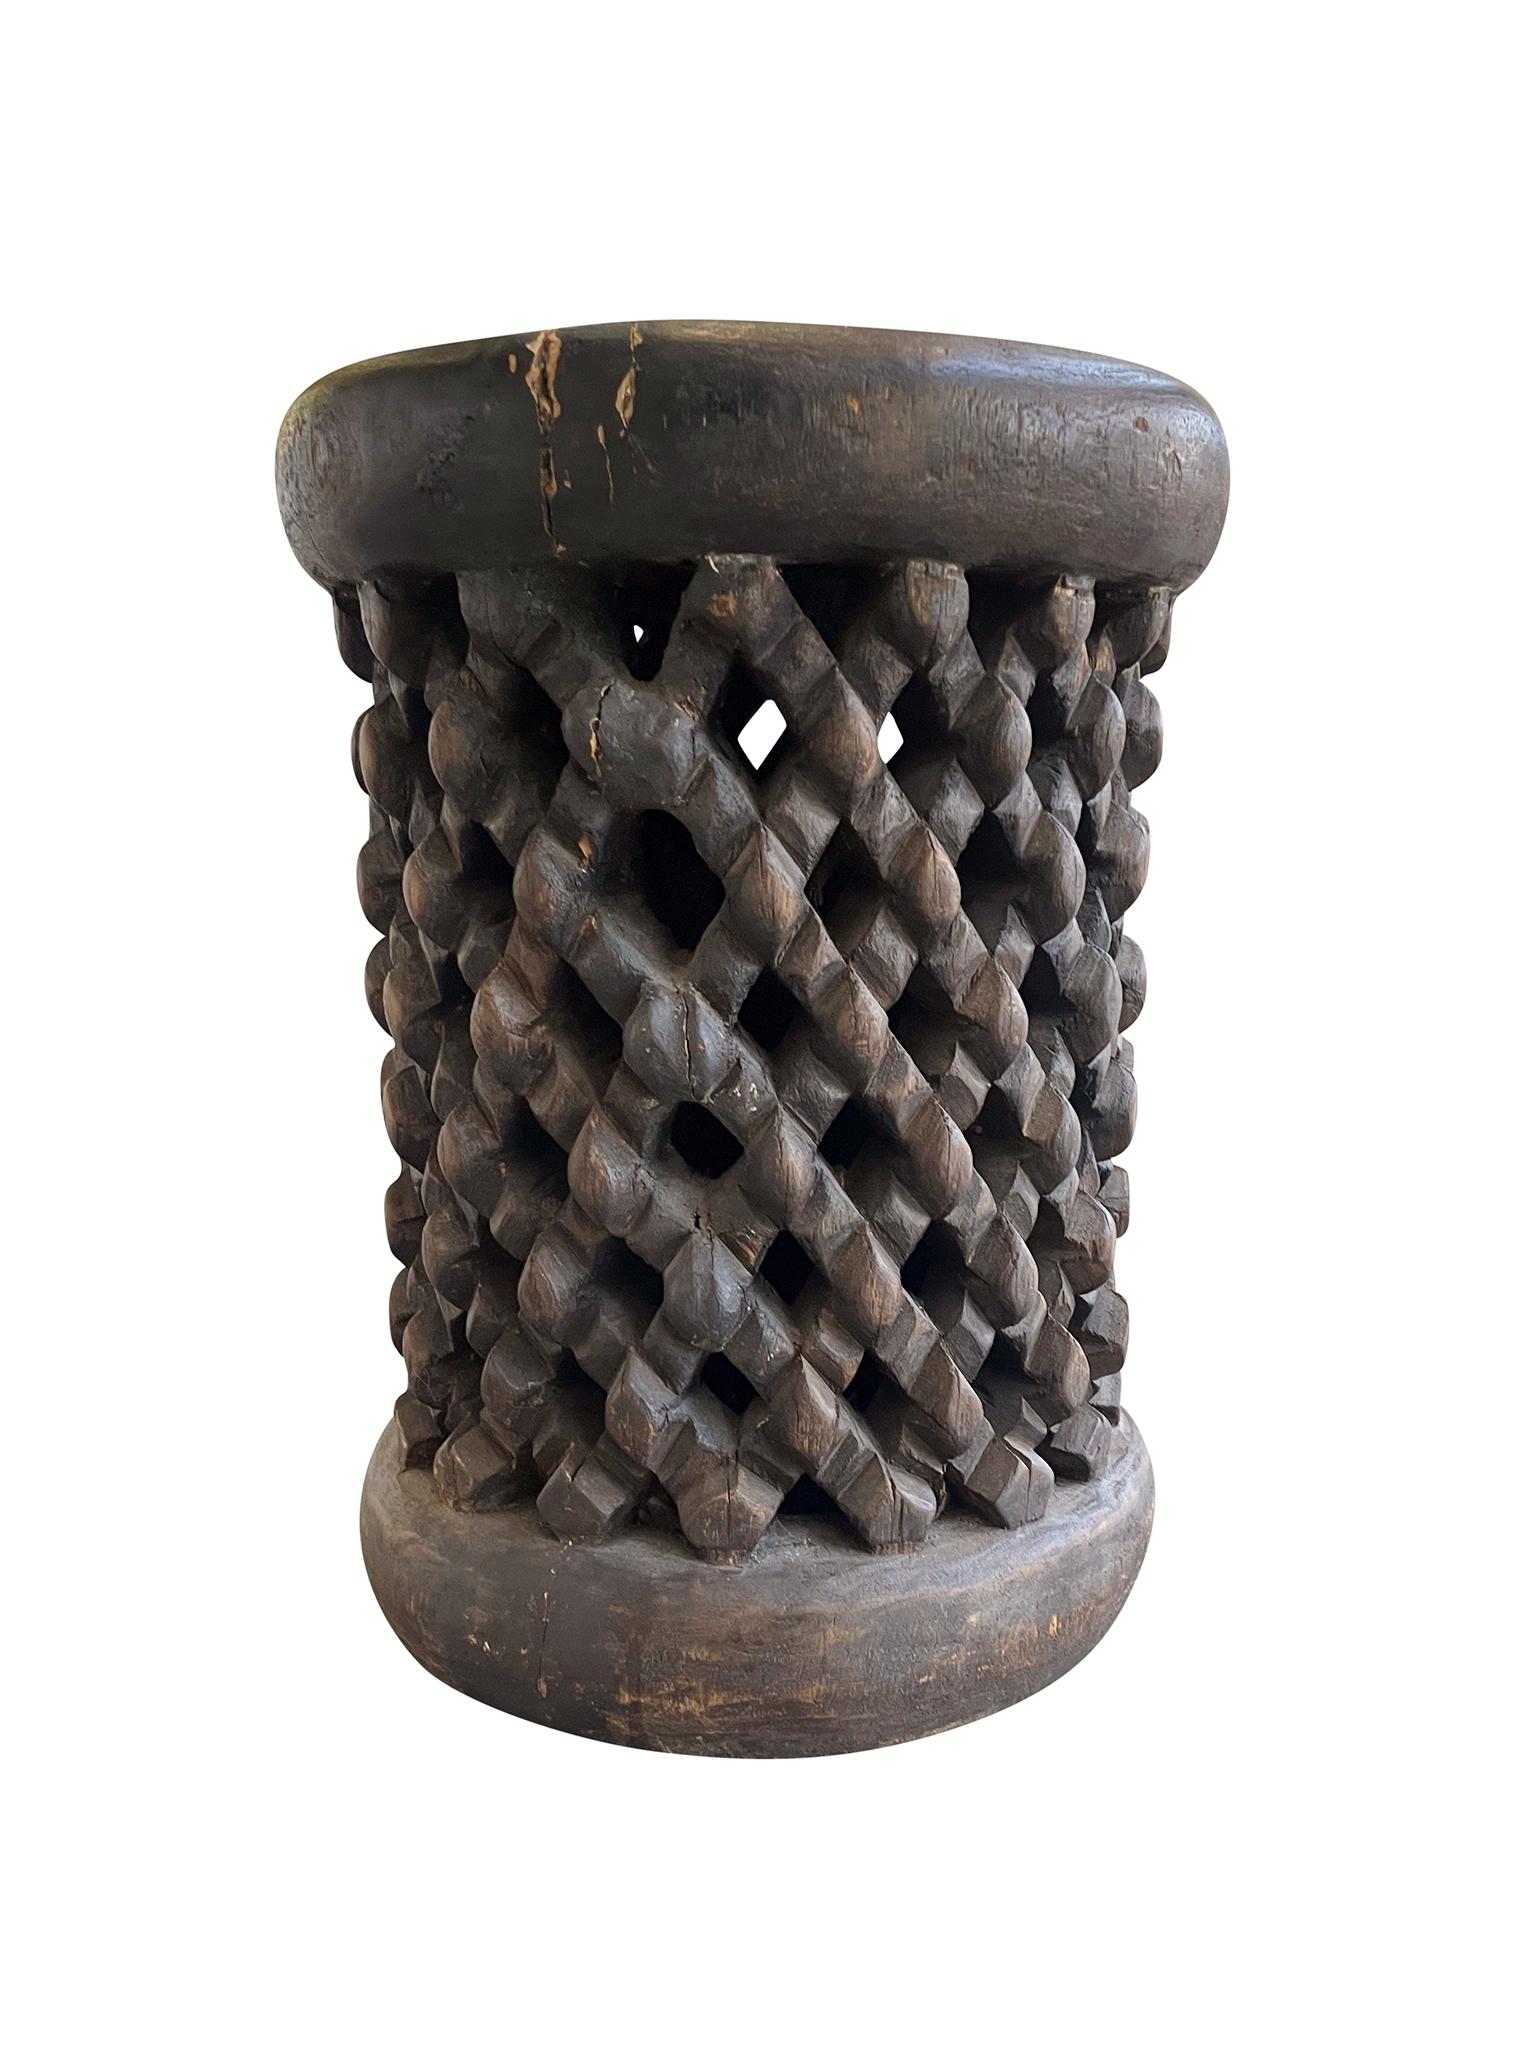 Hand-carved wood Bamileke table from Cameroon, mid-late 20th century. The body of the table is intricately carved with a lattice-like design. We love the smoothed edges of the top and the overall organic textures and tone of the